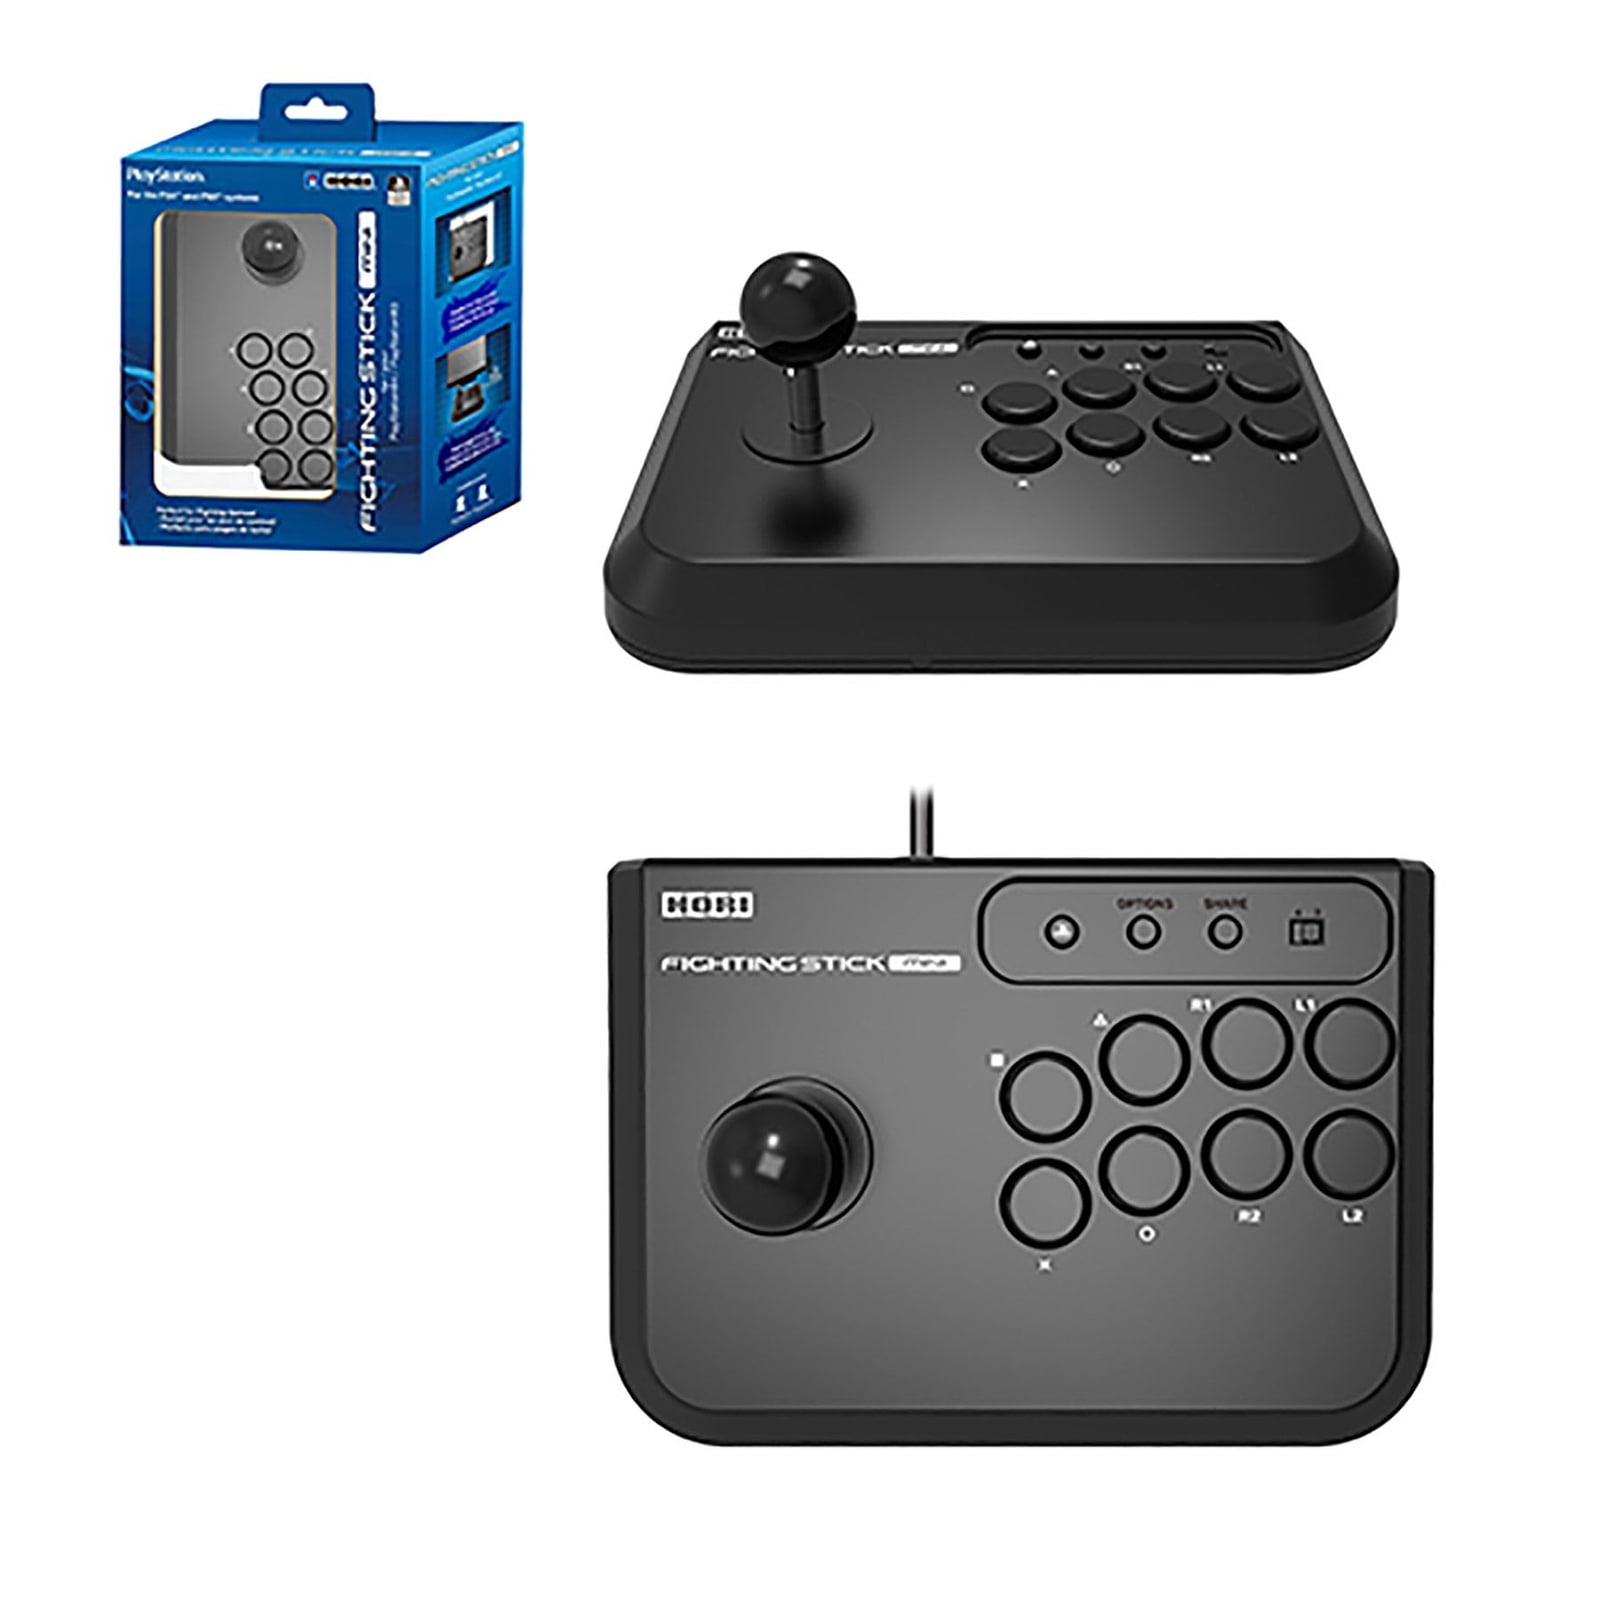 HORI FIGHTING STICK ARCADE PLAYSTATION CONTROLLER for PS3 PS4 VIDEO GAME MINI 